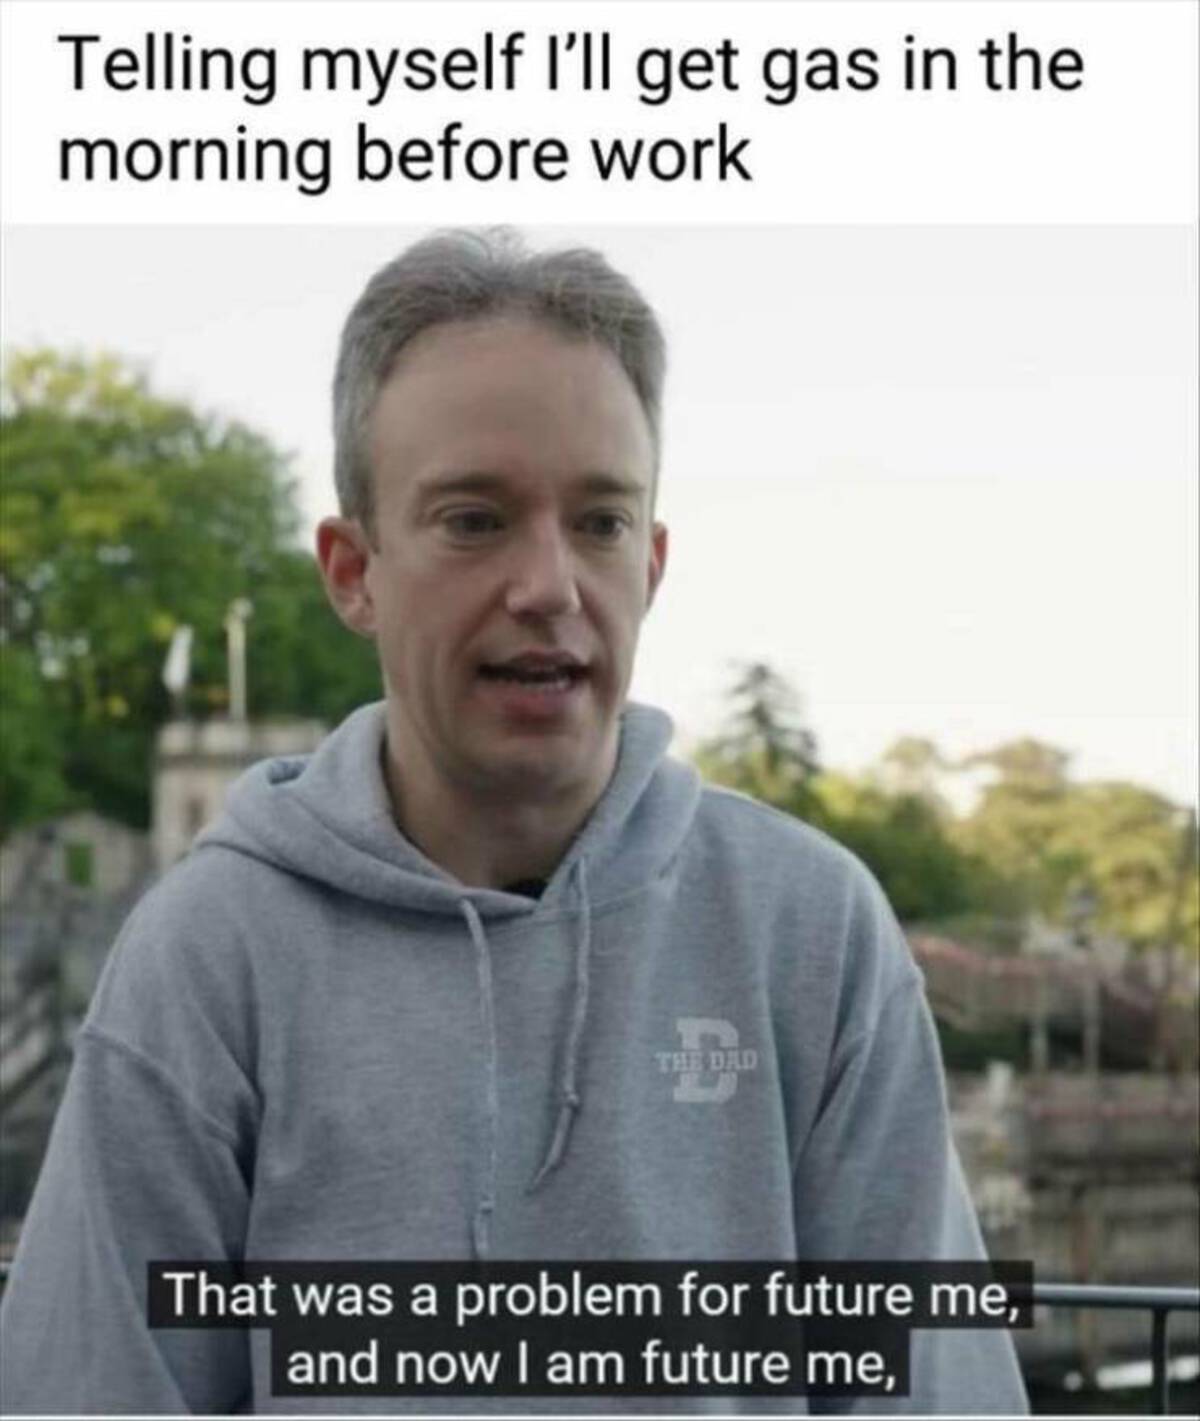 technical debt meme - Telling myself I'll get gas in the morning before work The Dad That was a problem for future me, and now I am future me,